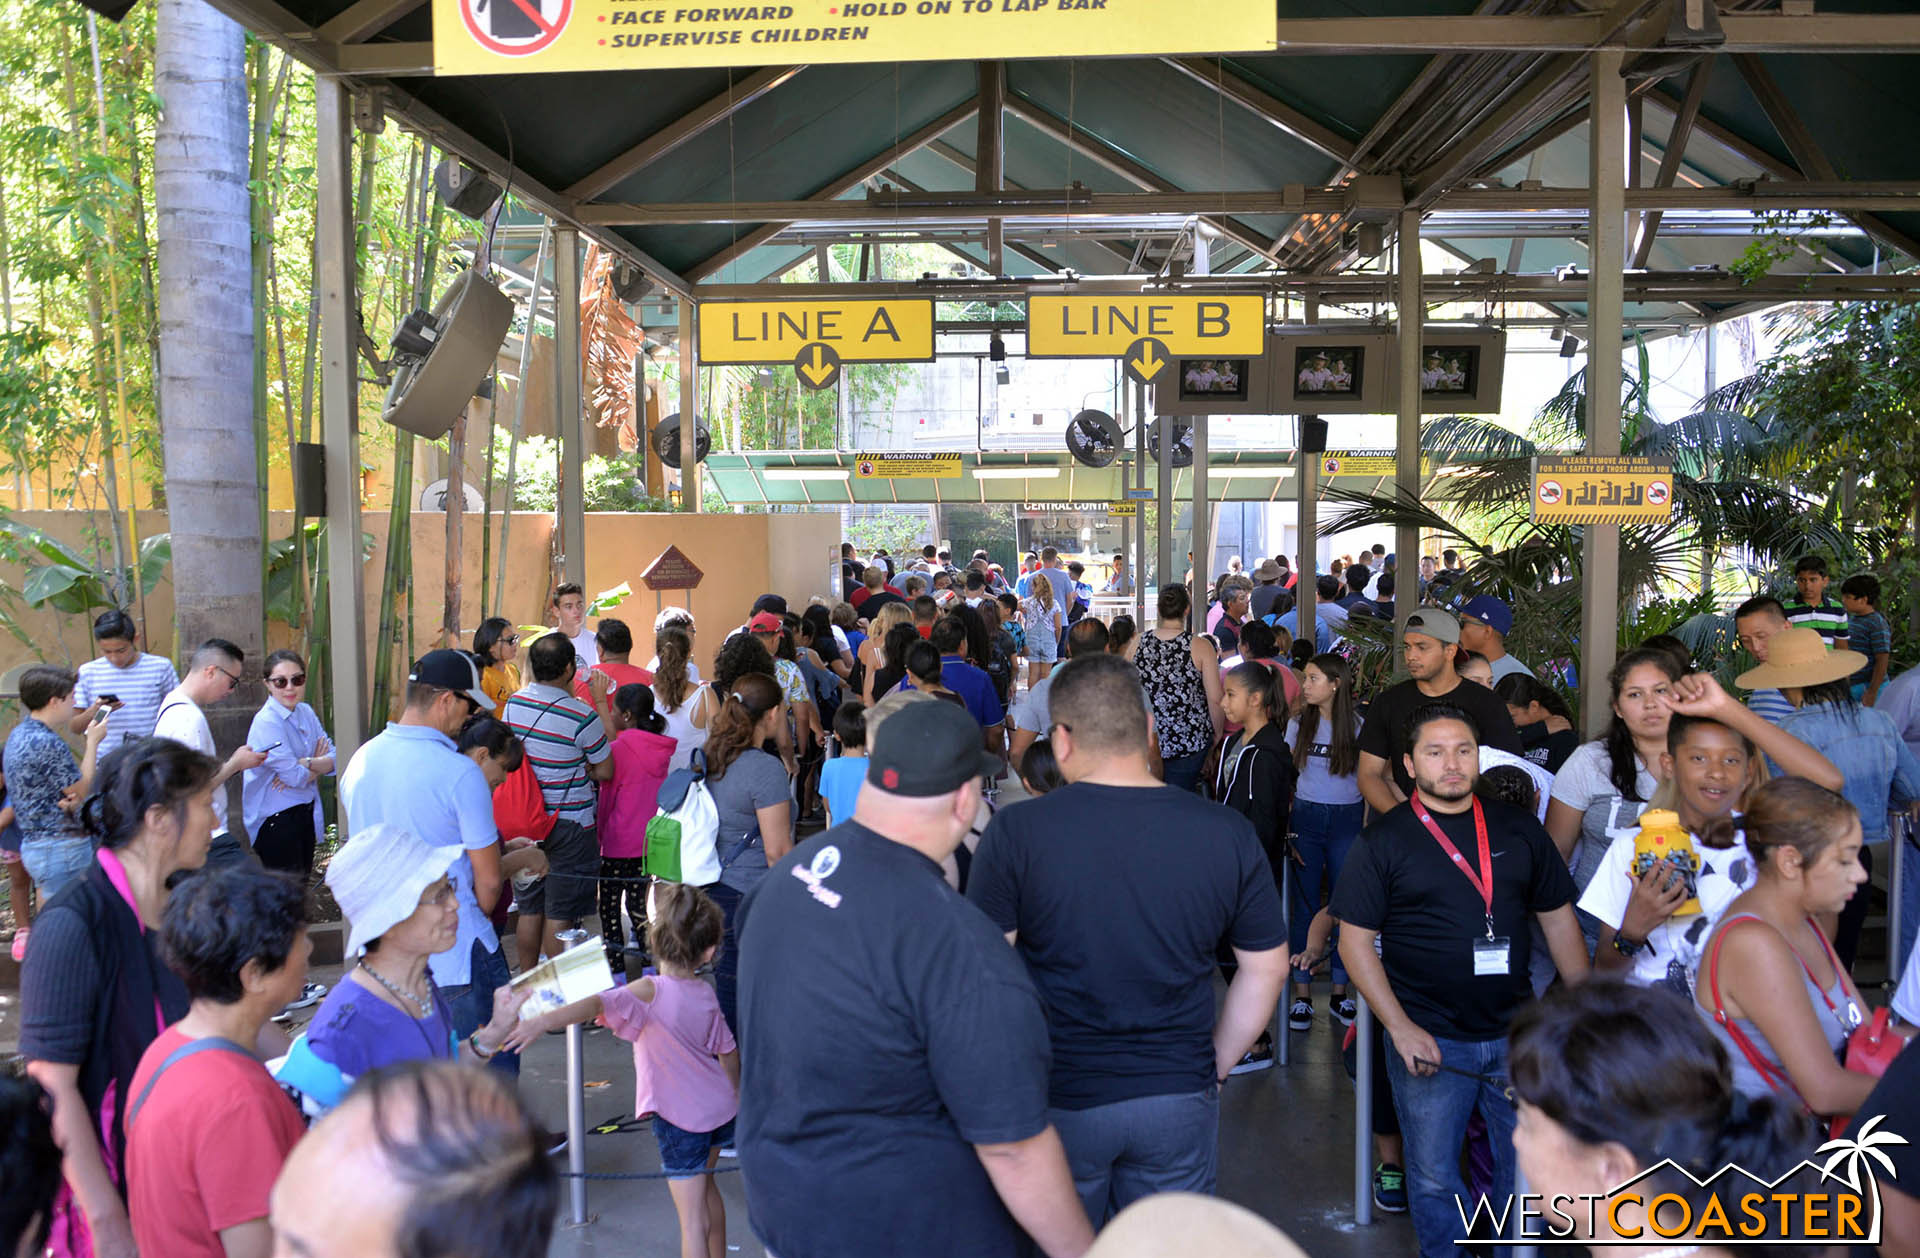  There were a fair amount of people in line on this final day. 